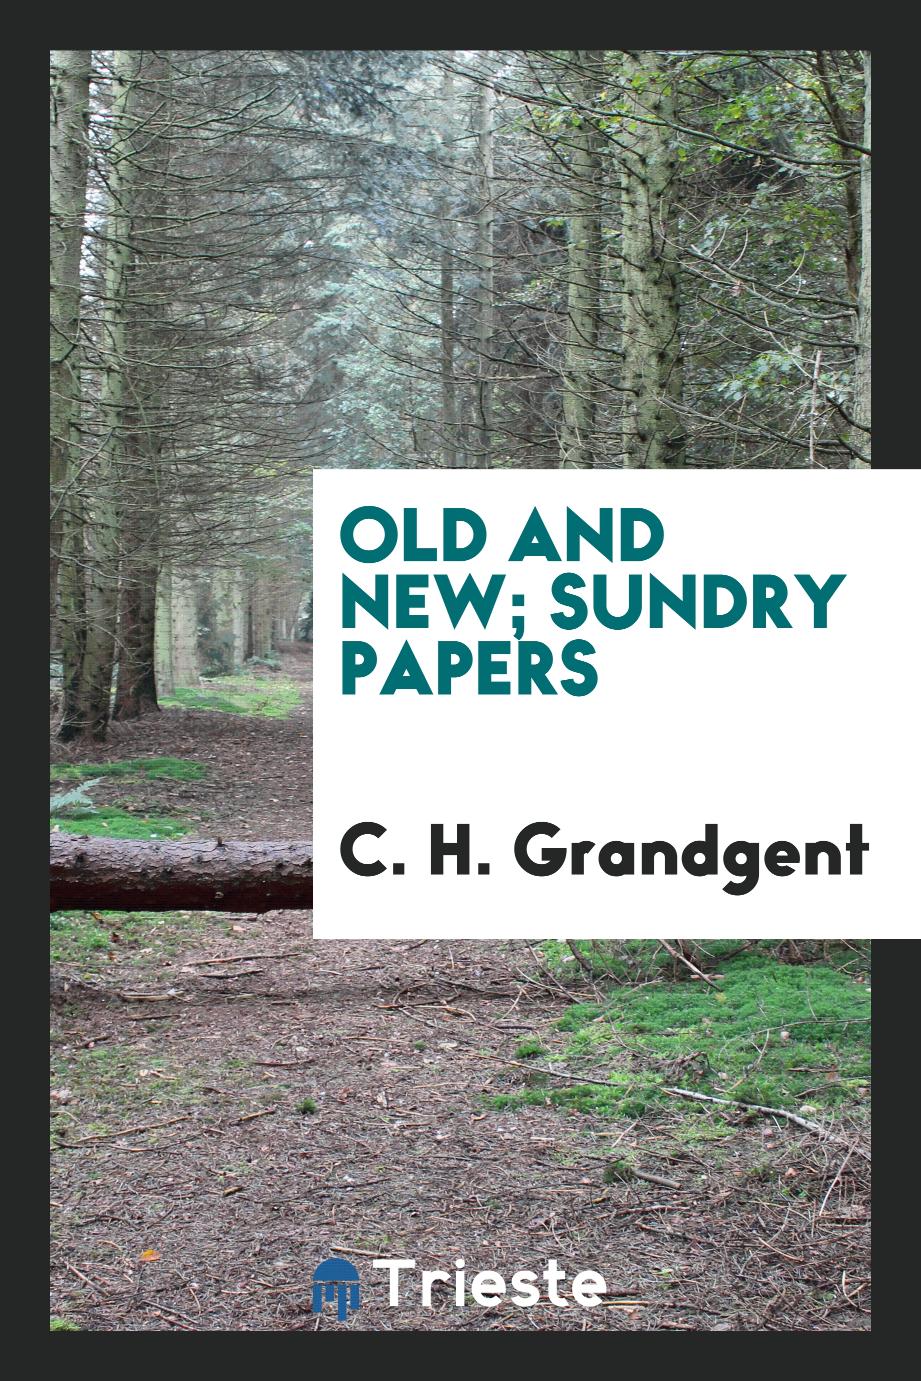 Old and new; sundry papers